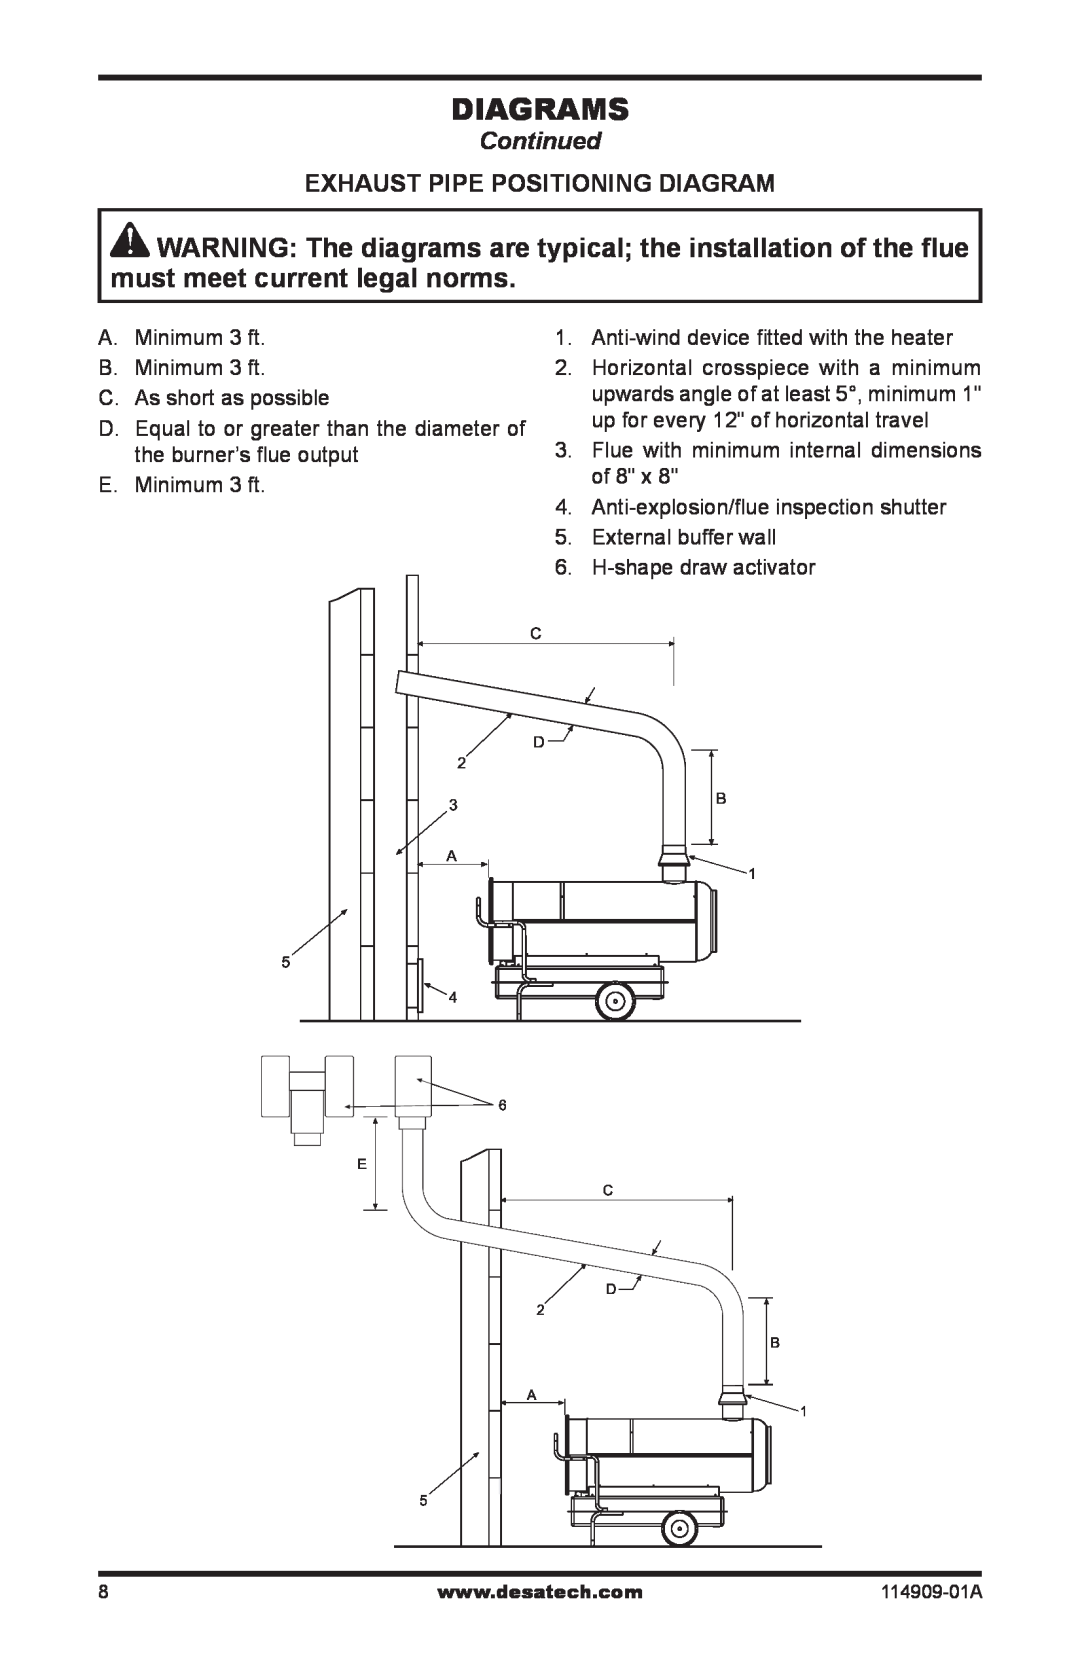 Desa 280-IF, 160-IF owner manual Diagrams, Continued, Exhaust Pipe Positioning Diagram 